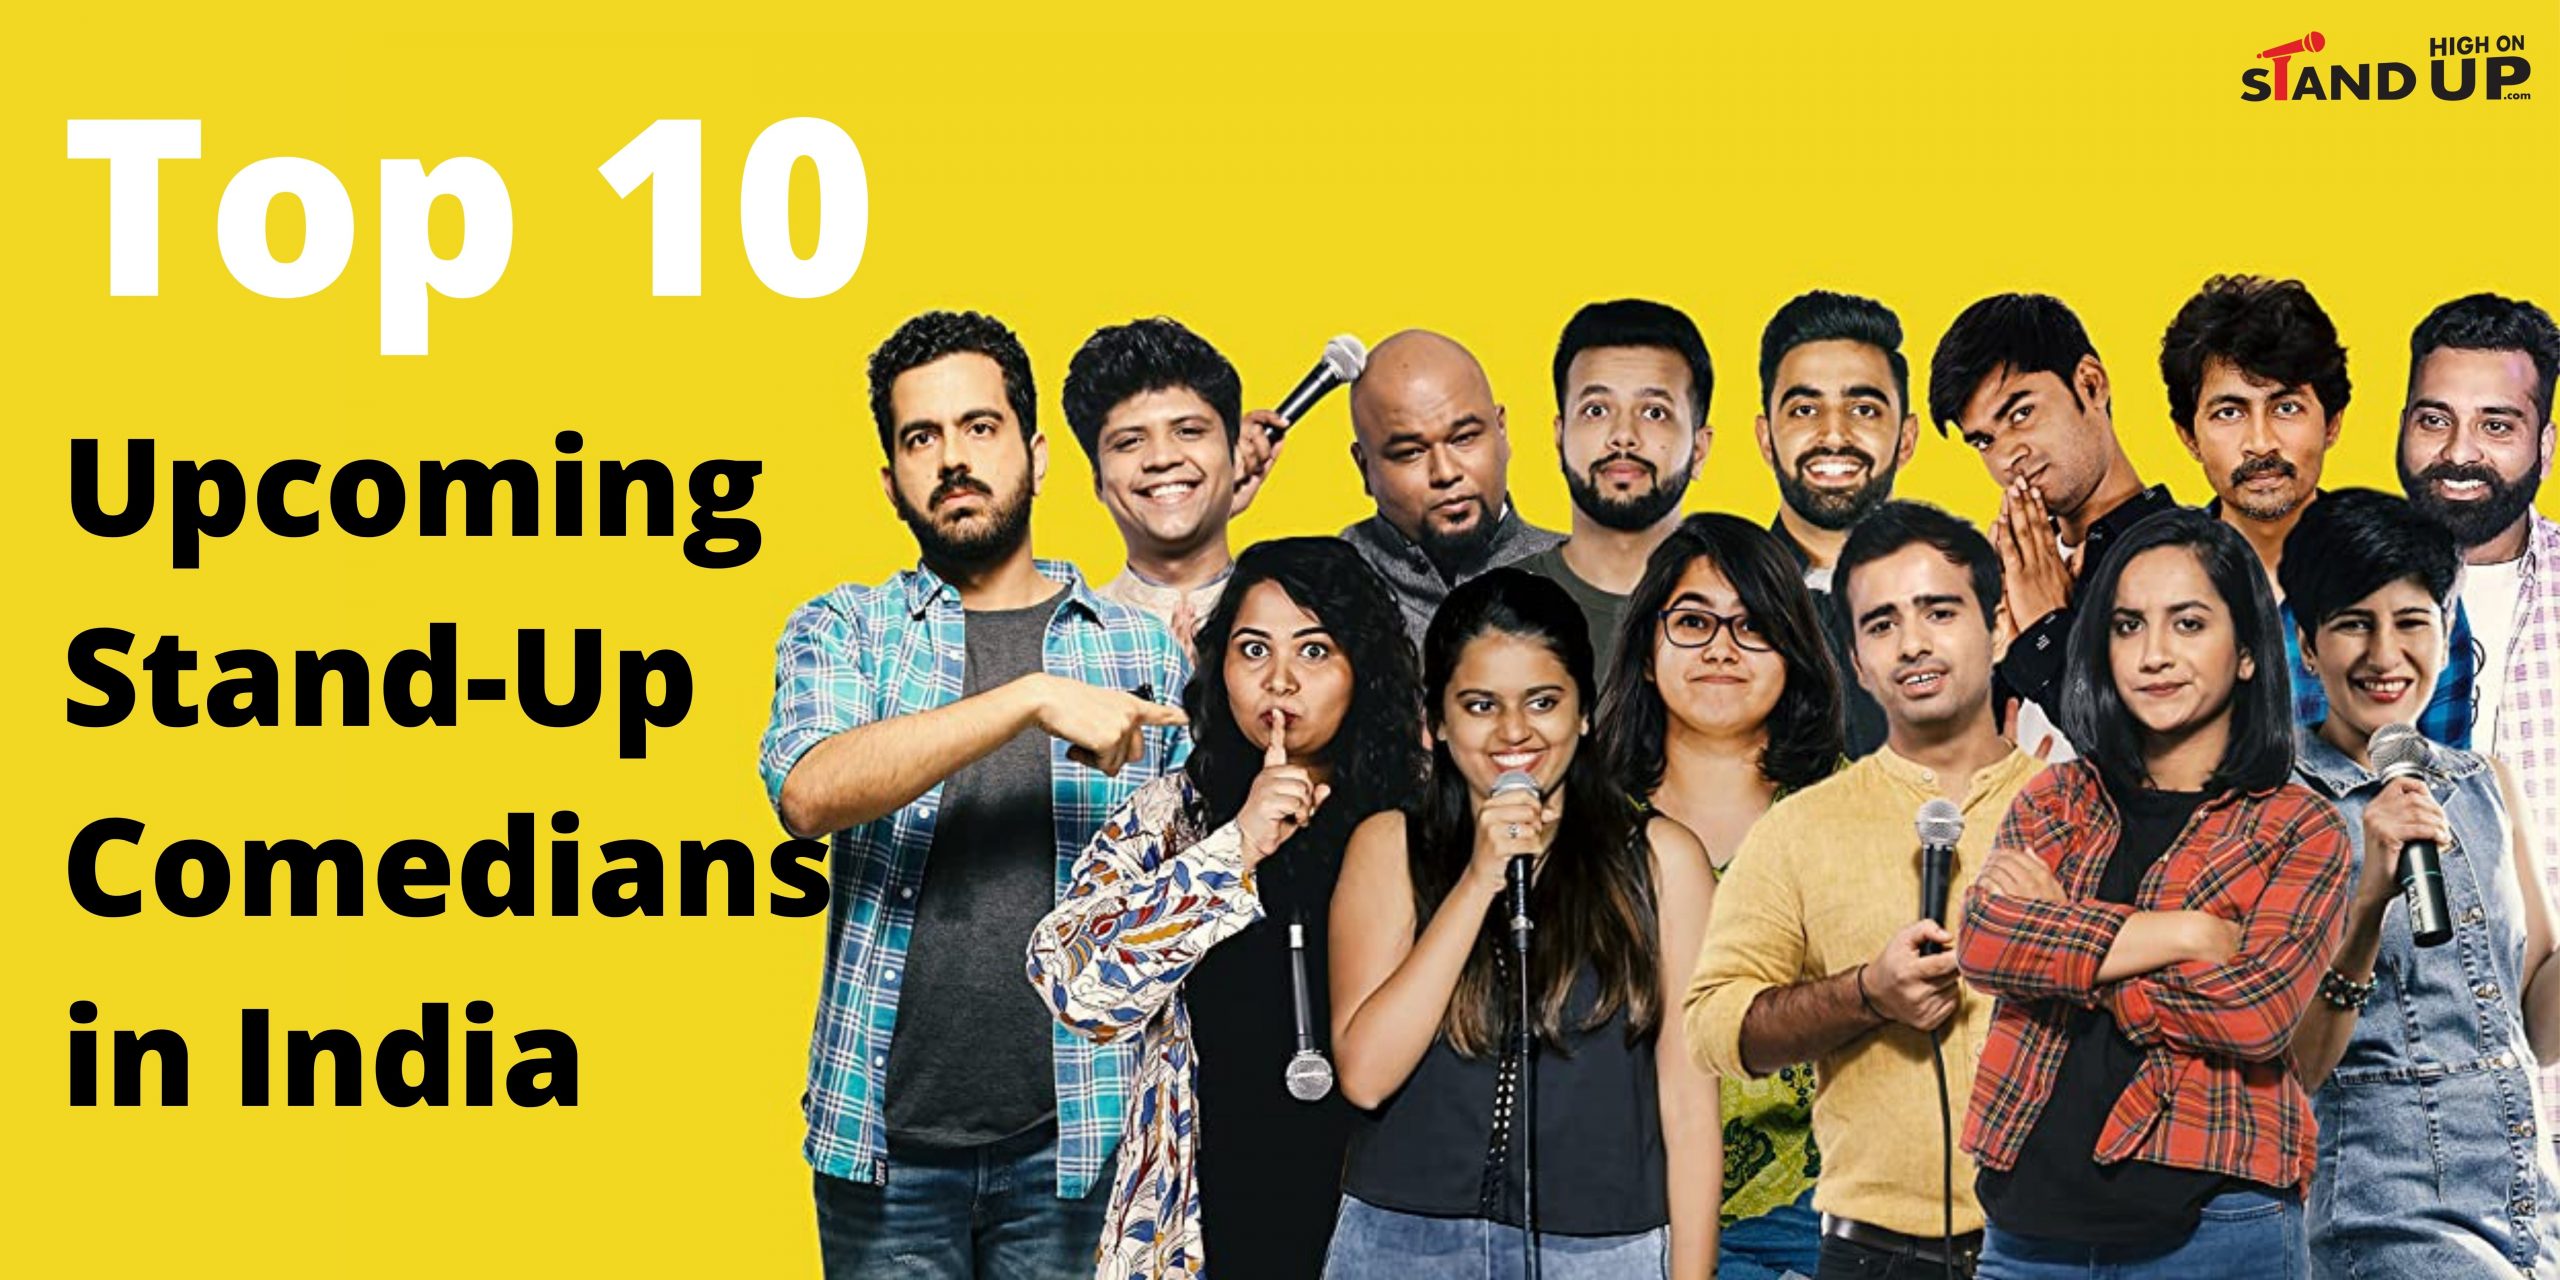 Top 10 Upcoming Stand-Up Comedians in India